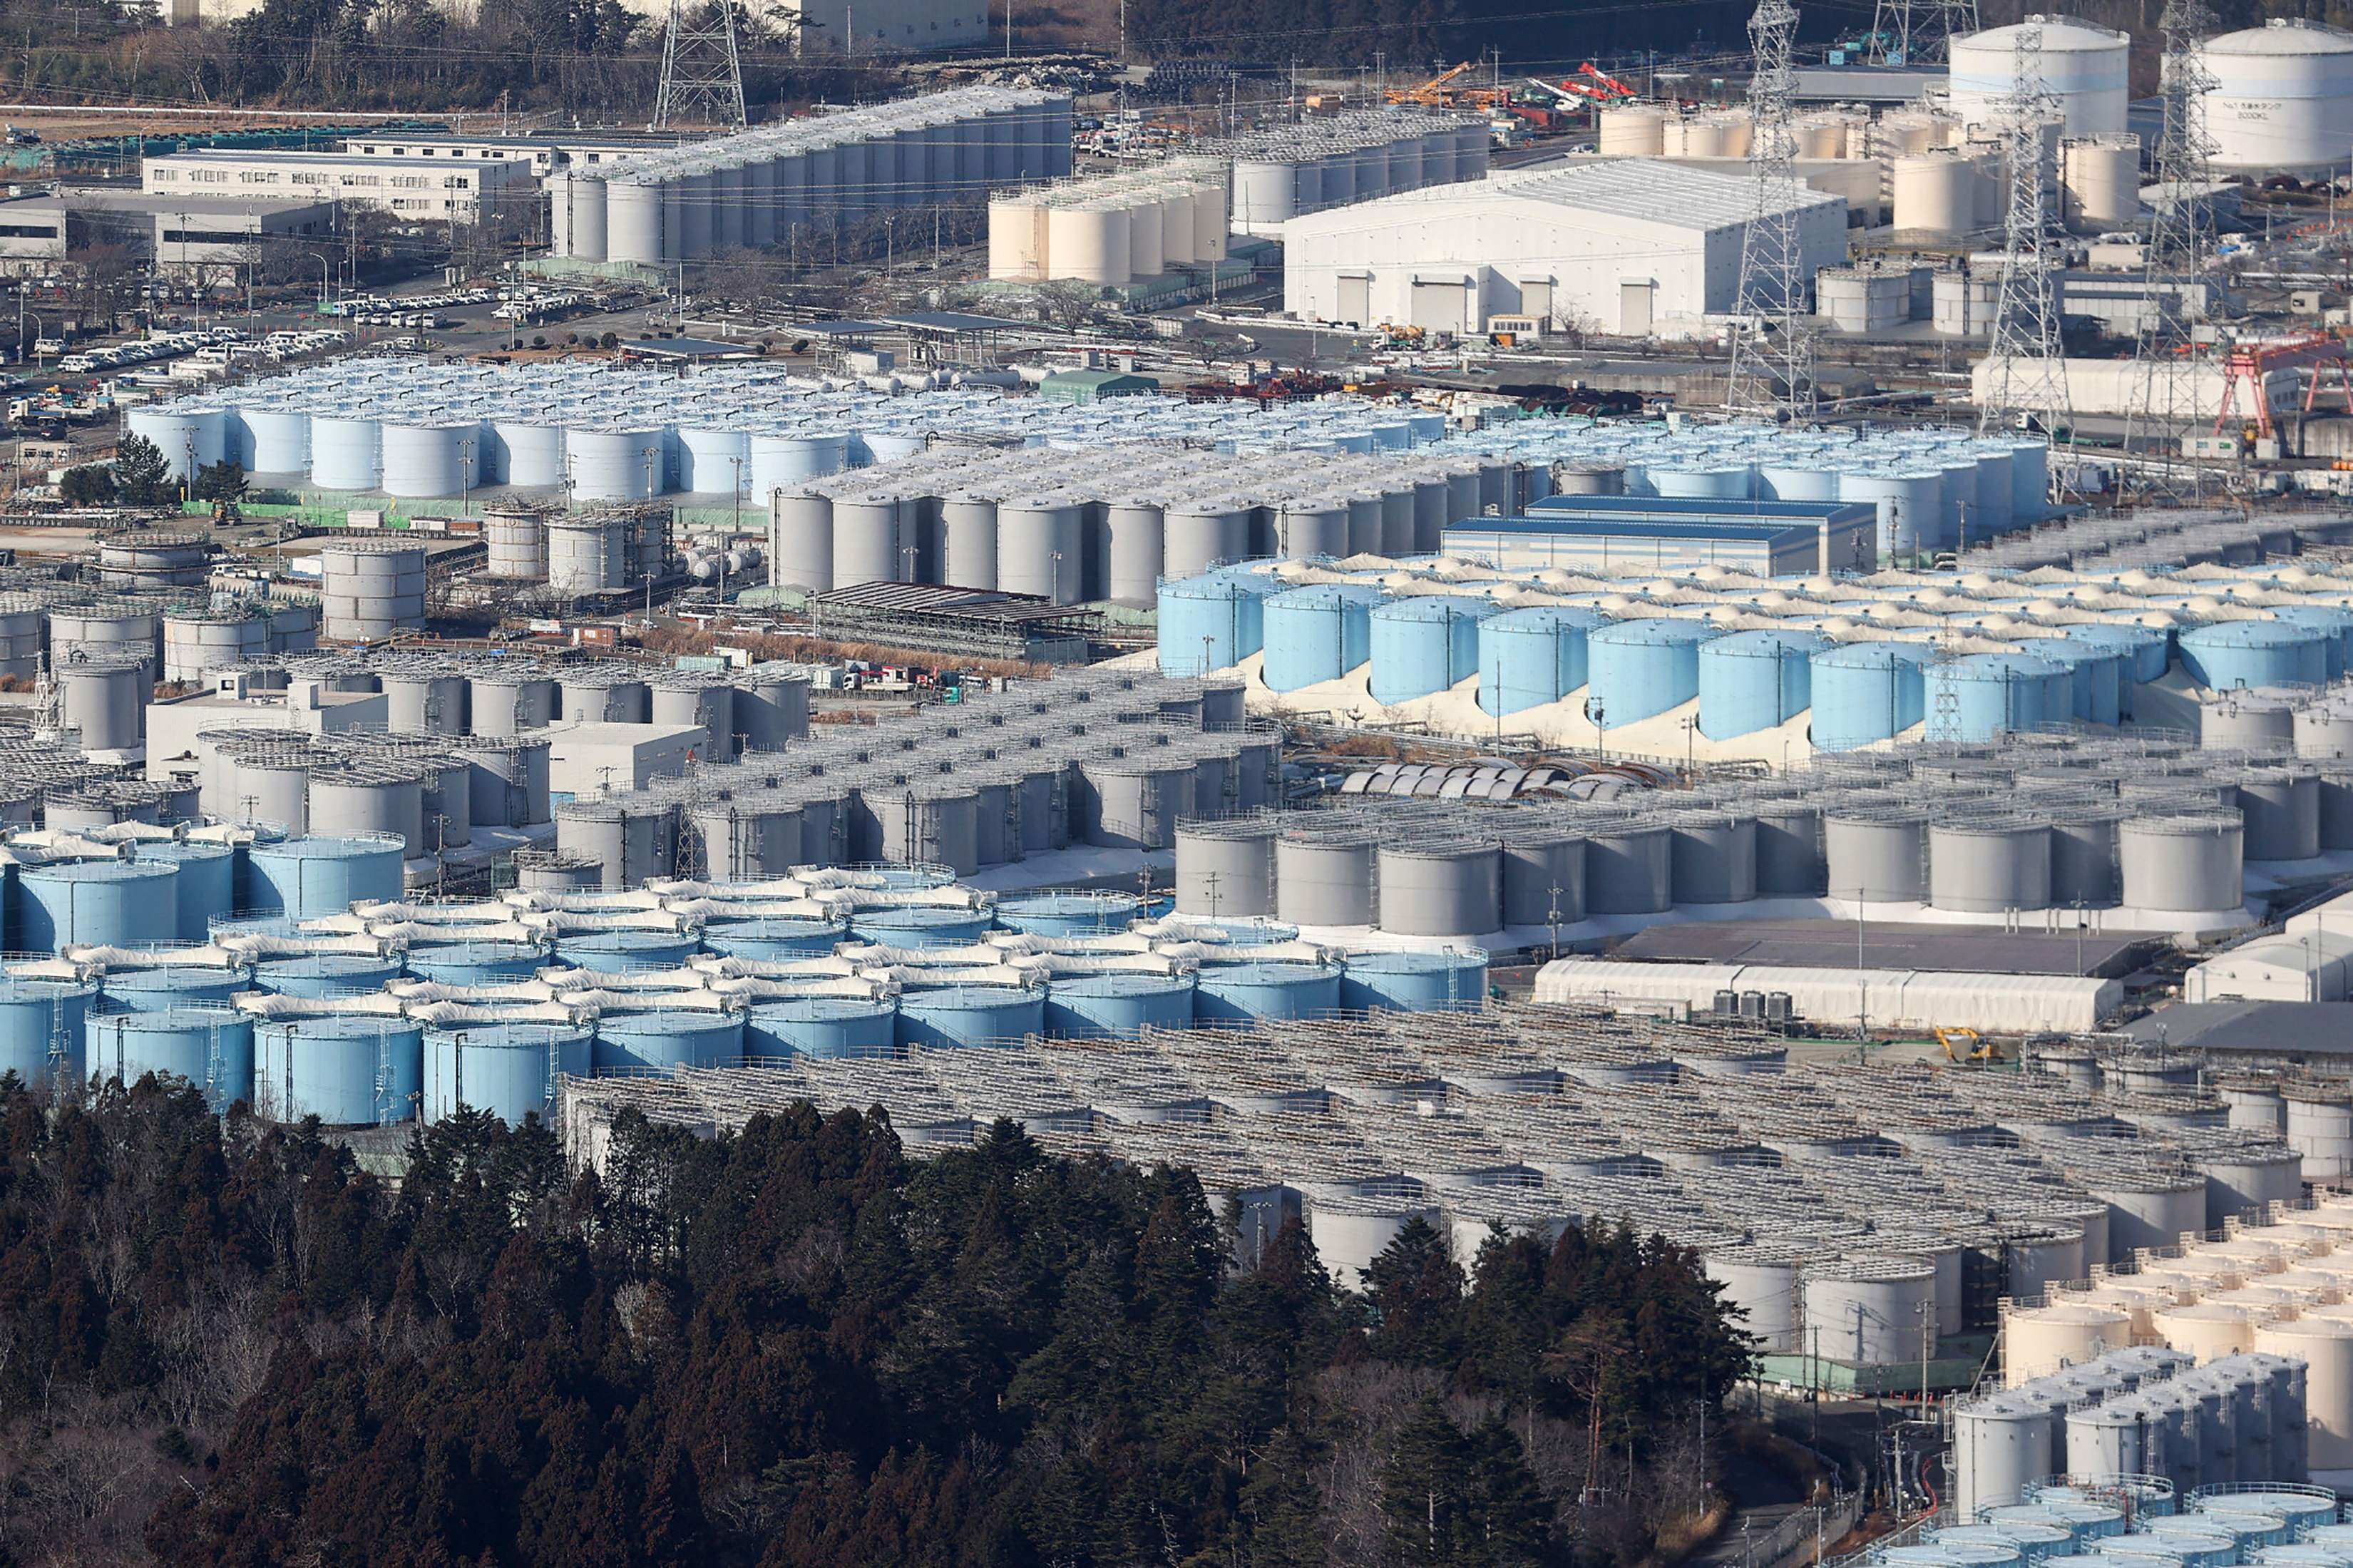 An aerial view of storage tanks used to hold treated waste water from Japan’s crippled Fukushima Daiichi Nuclear Power Plant in Okuma, Fukushima prefecture. Photo: Jiji Press/AFP